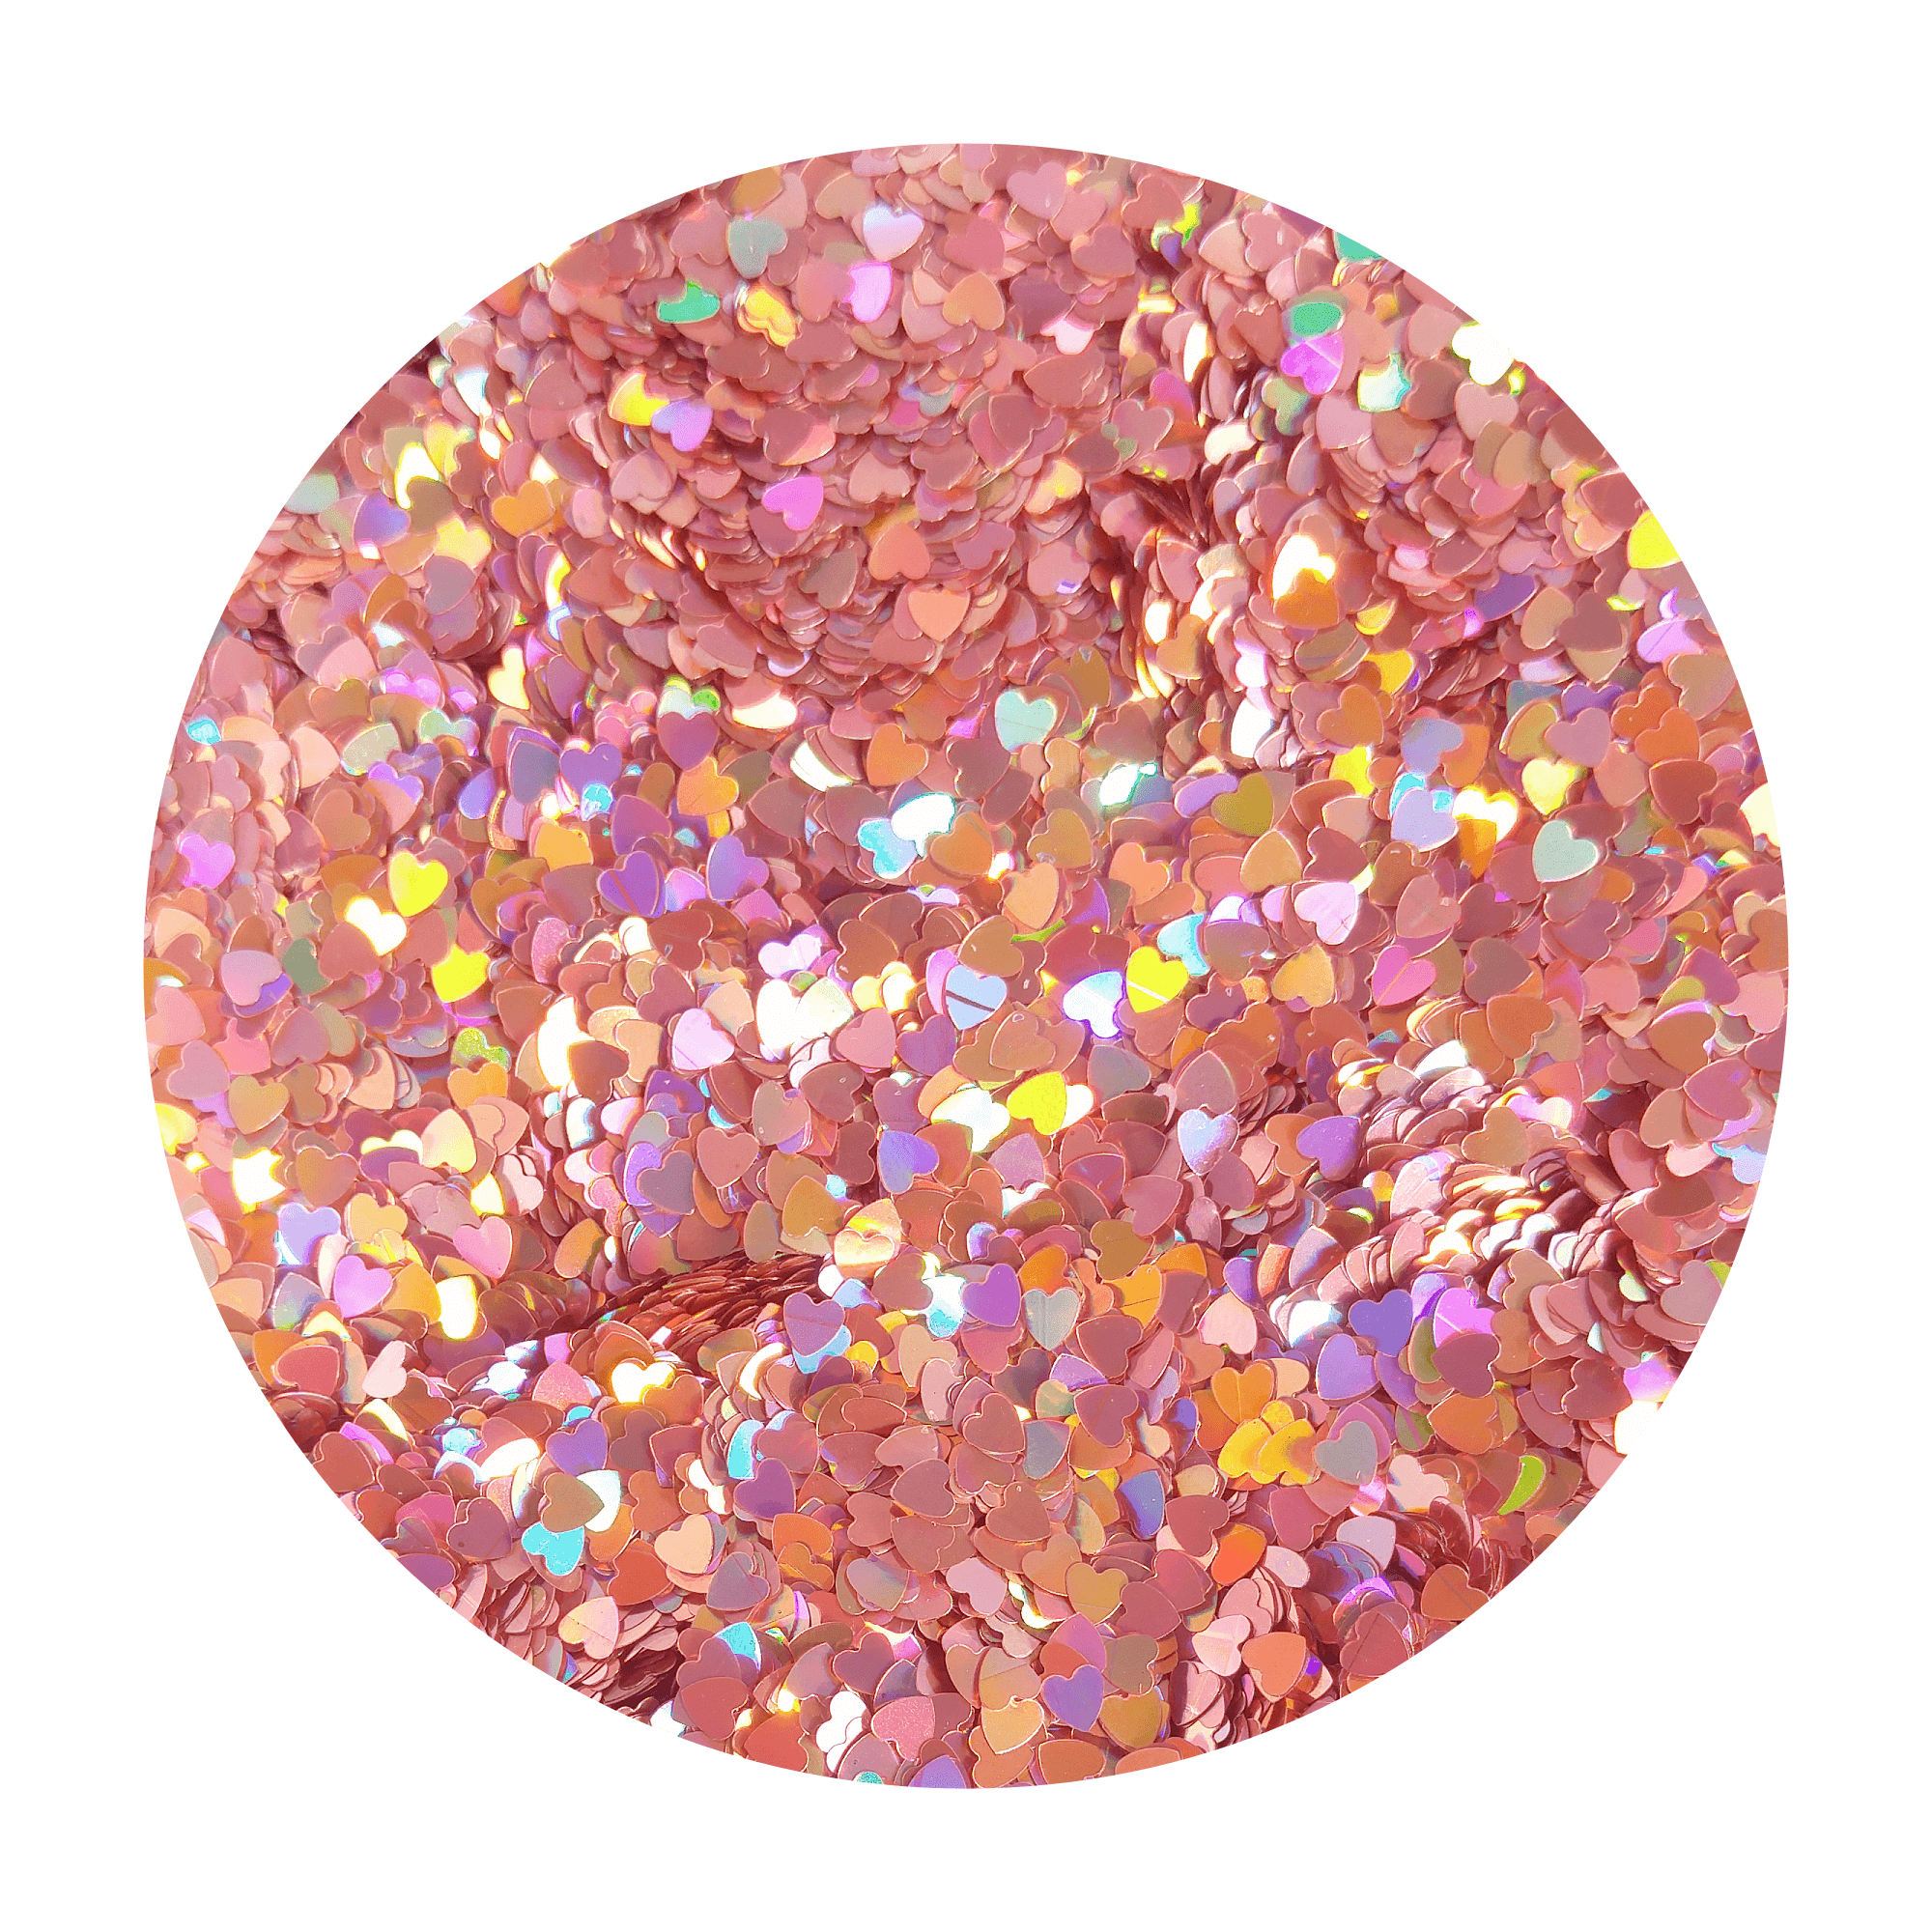 Silver Holographic Circle/Dot Glitter 3mm